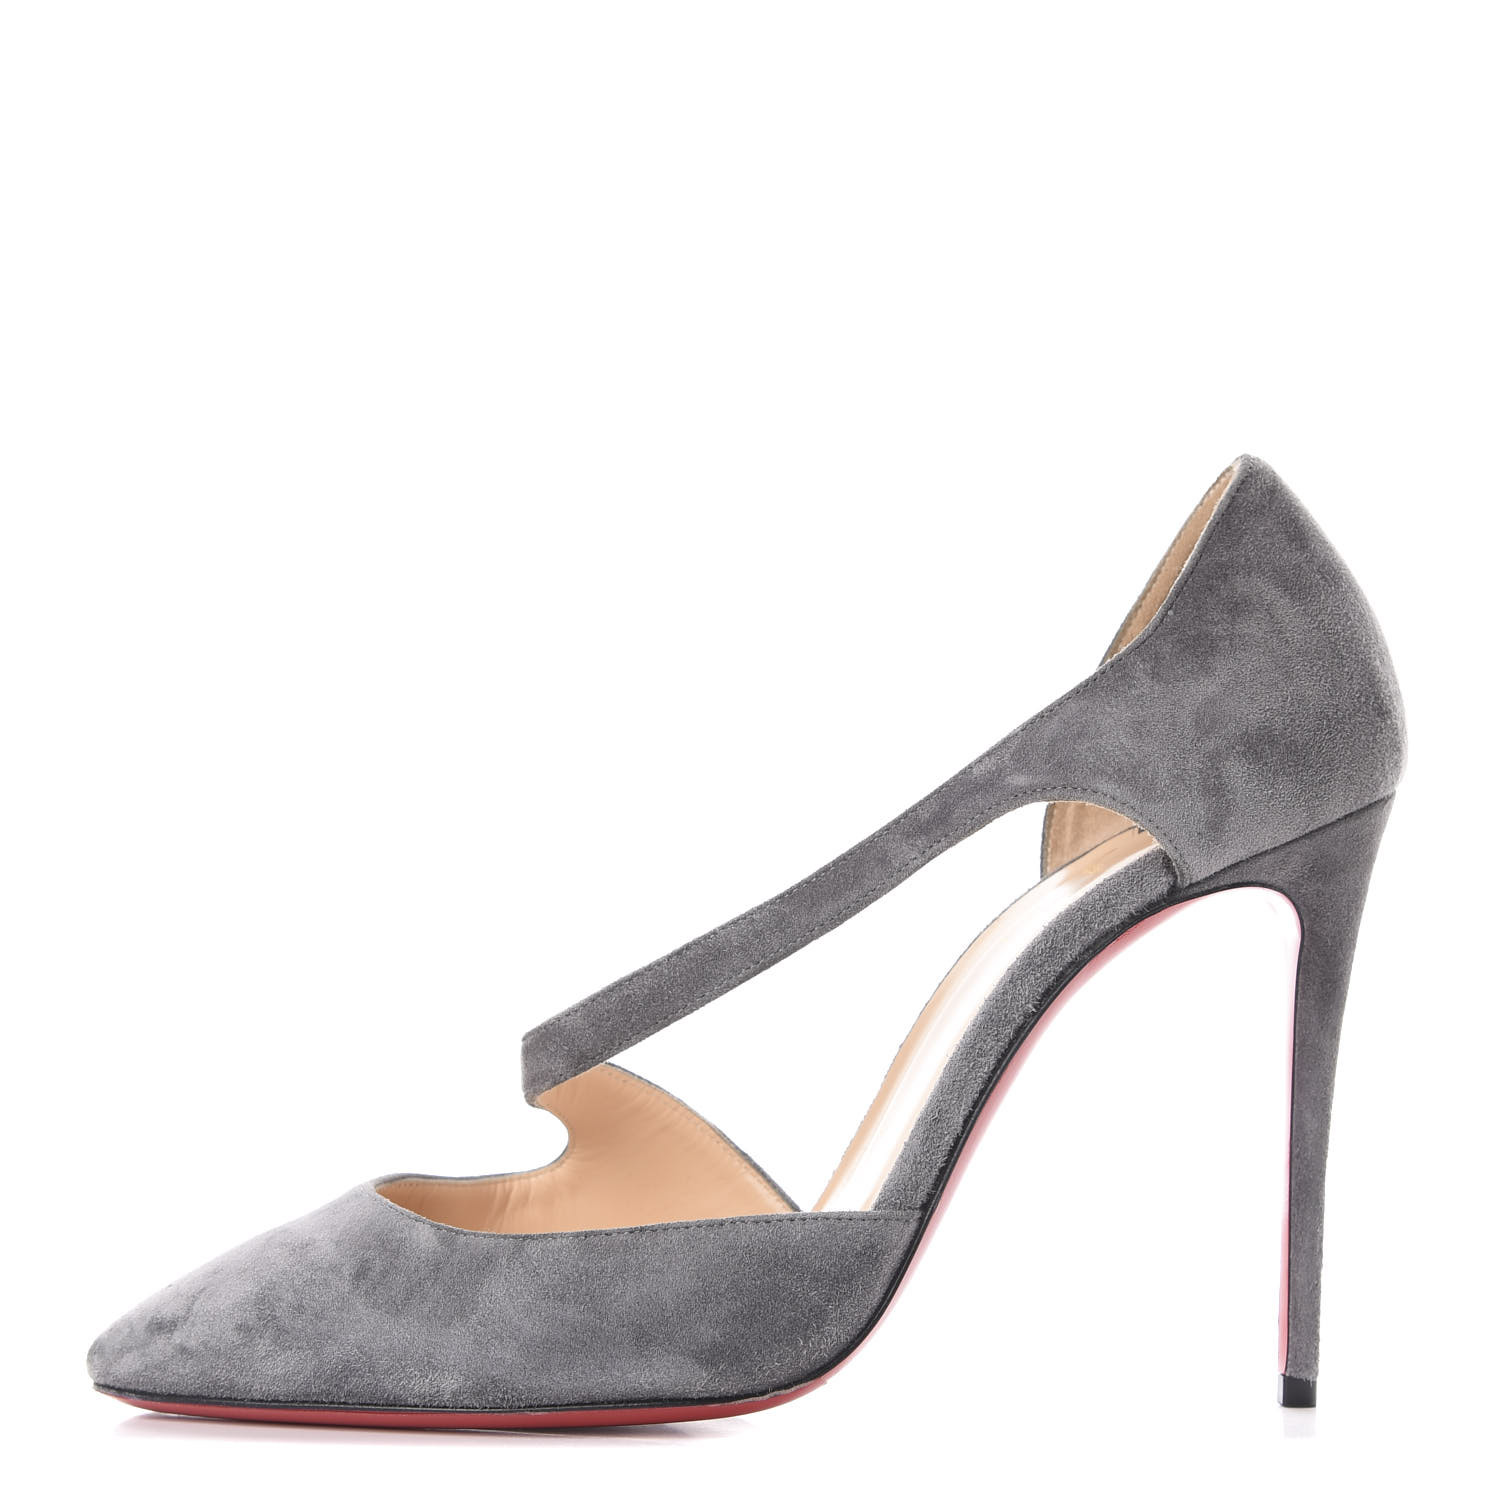 christian louboutin catchy one